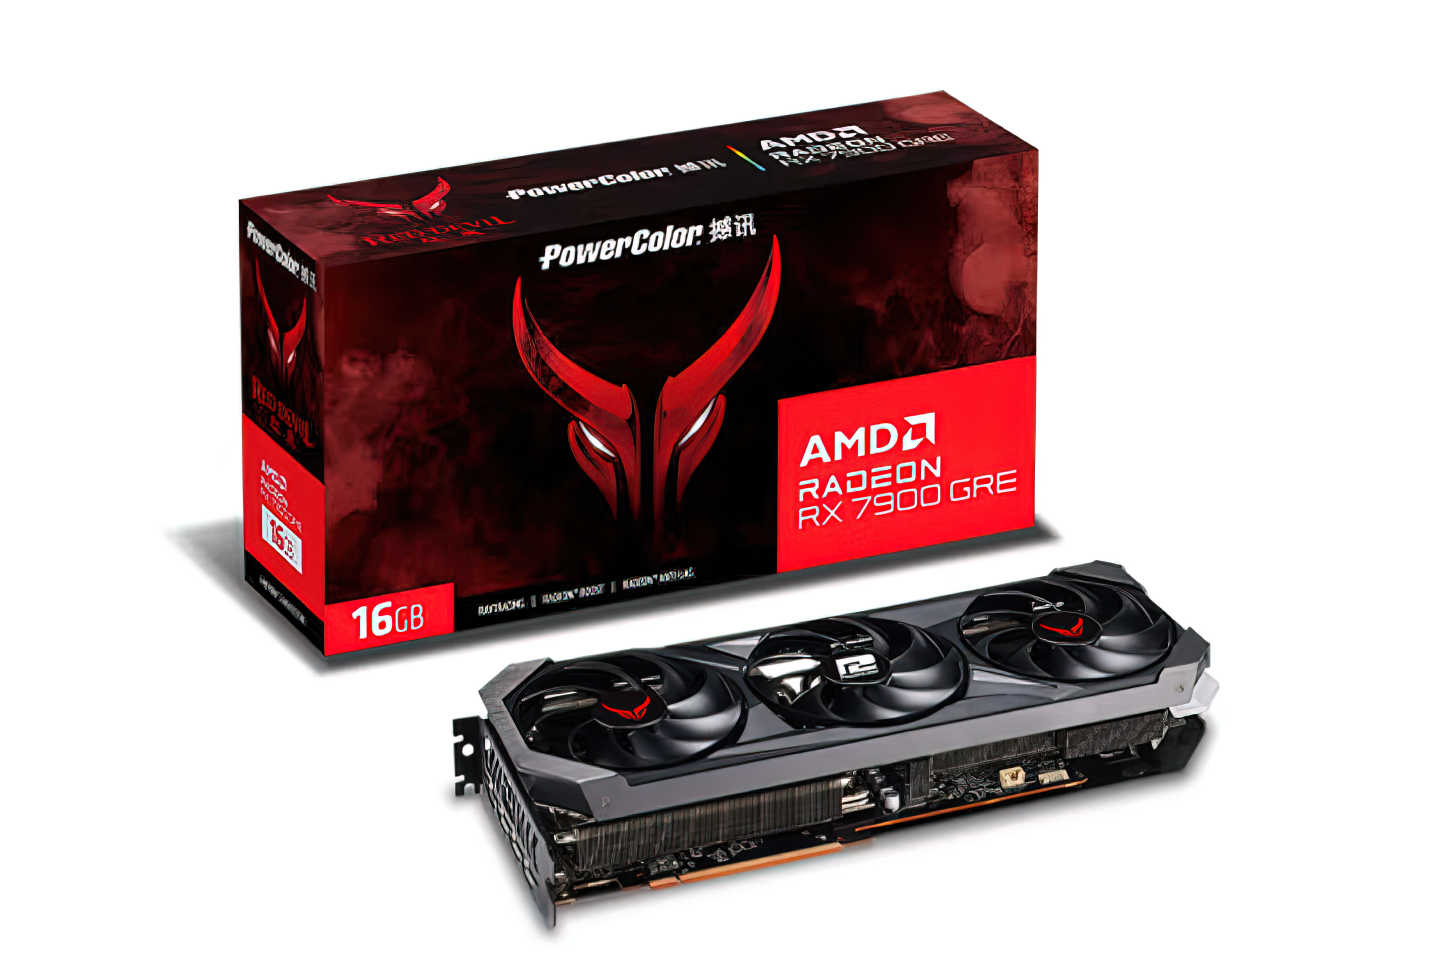 AMD Radeon RX 7900 GRE unveiled by XFX, Sapphire and PowerColor